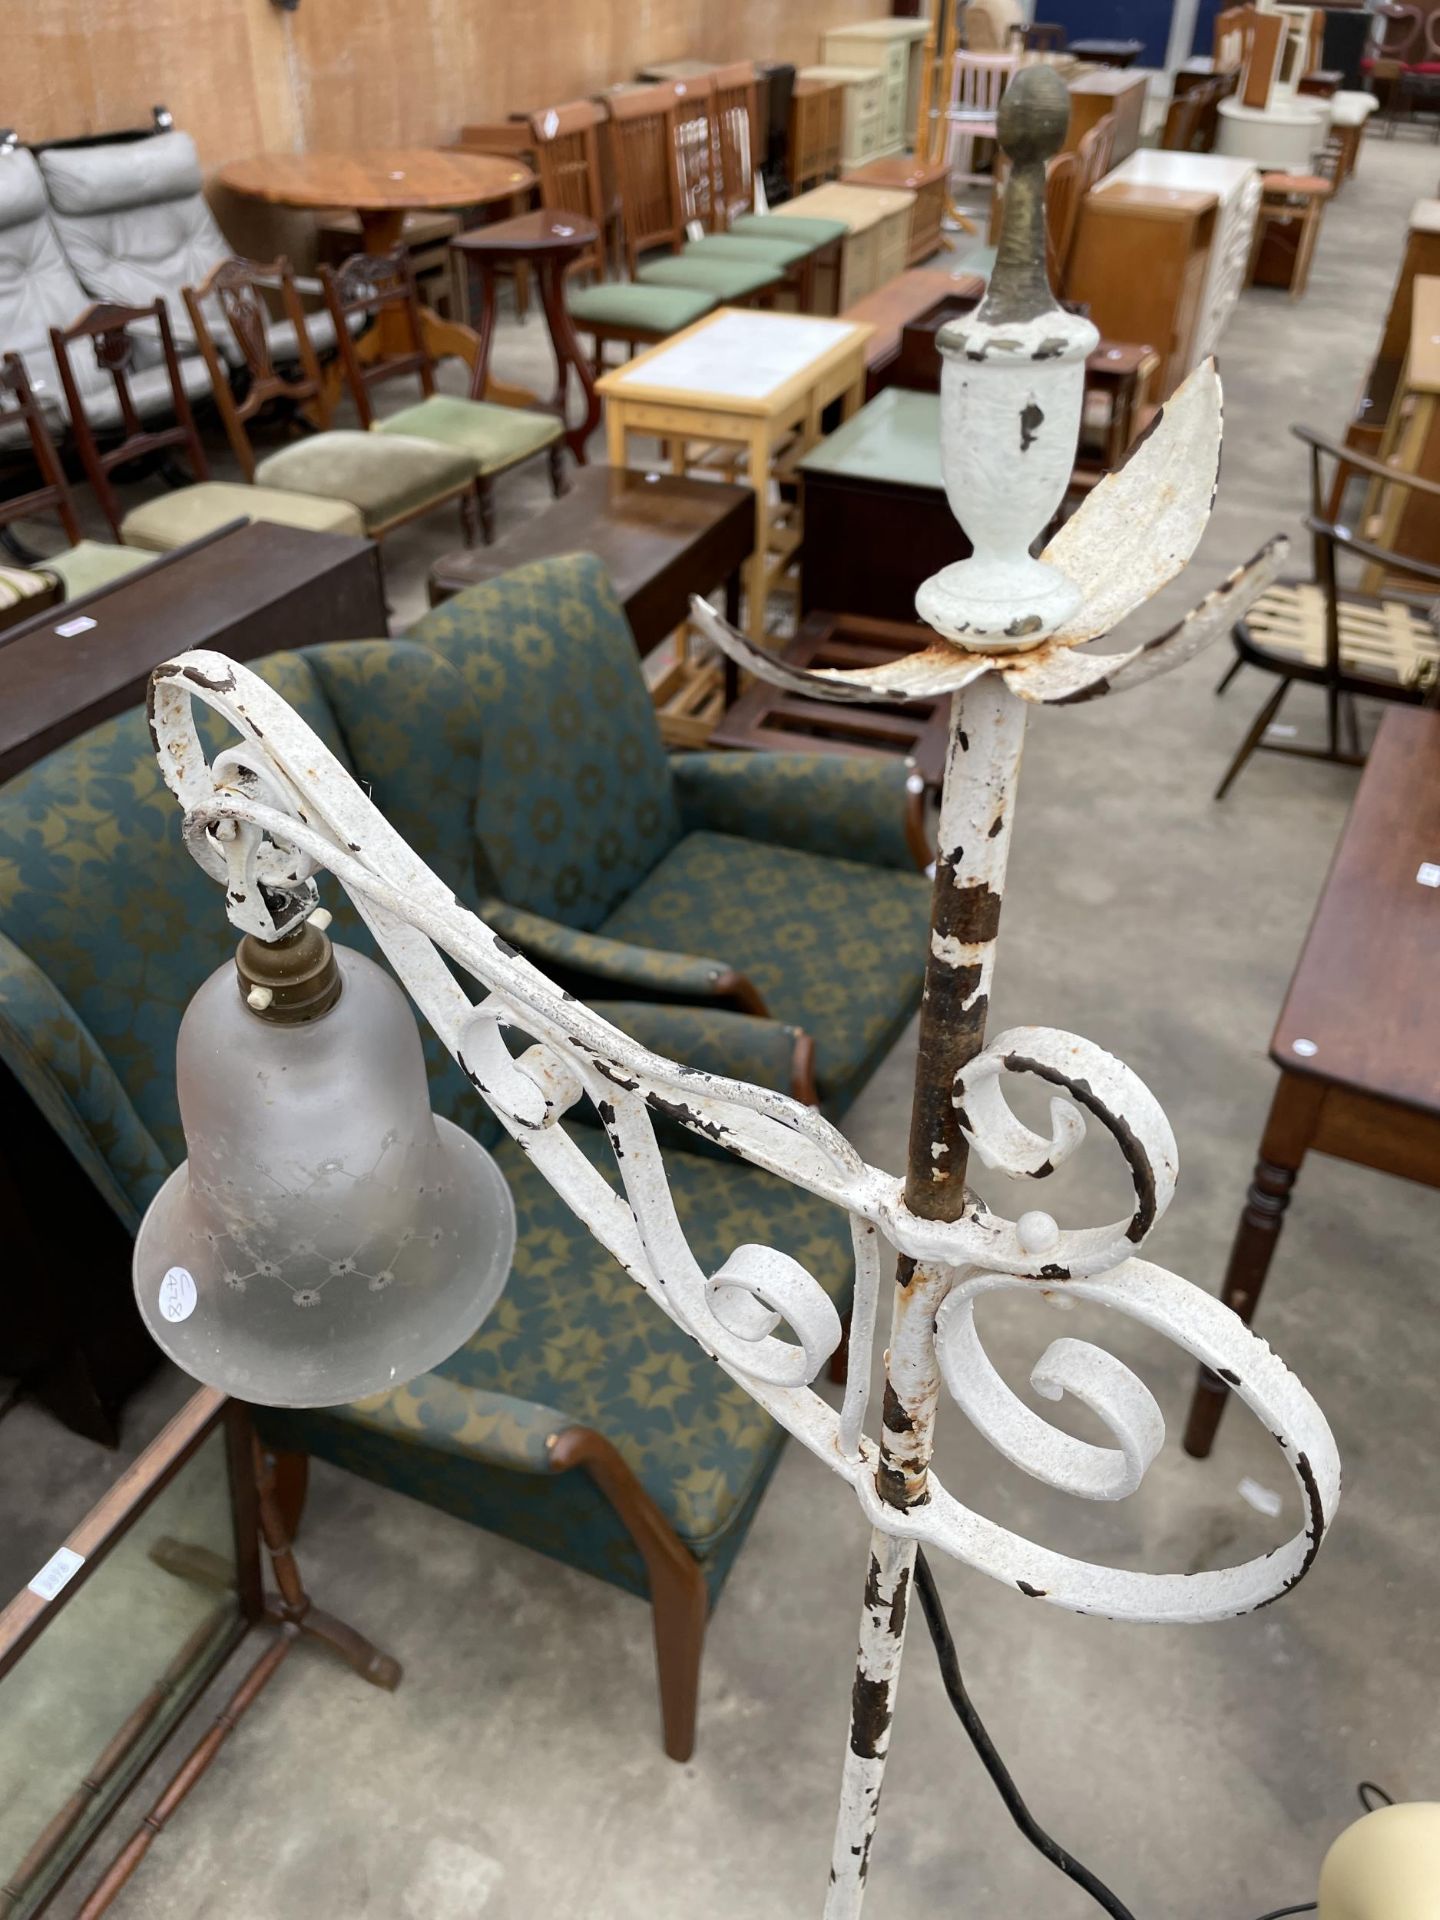 A CAST AND WROUGHT IRON STANDARD LAMP ON TRIPOD BASE WITH PRETTY SMOKED GLASS SHADE - Image 2 of 3